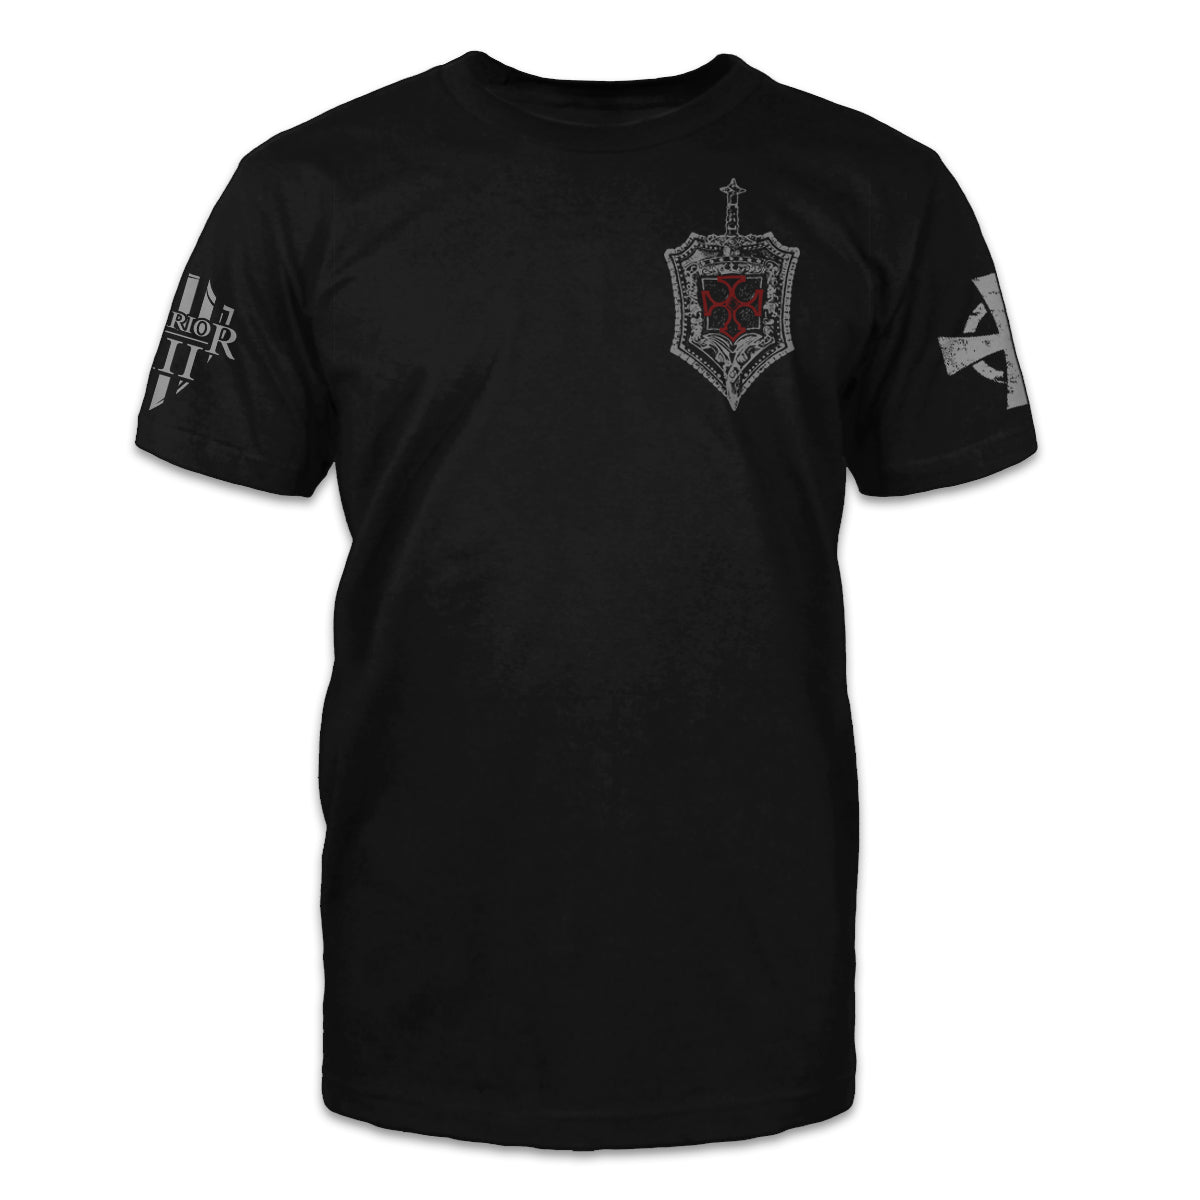 A black t-shirt with the knights templar shield printed on the front.